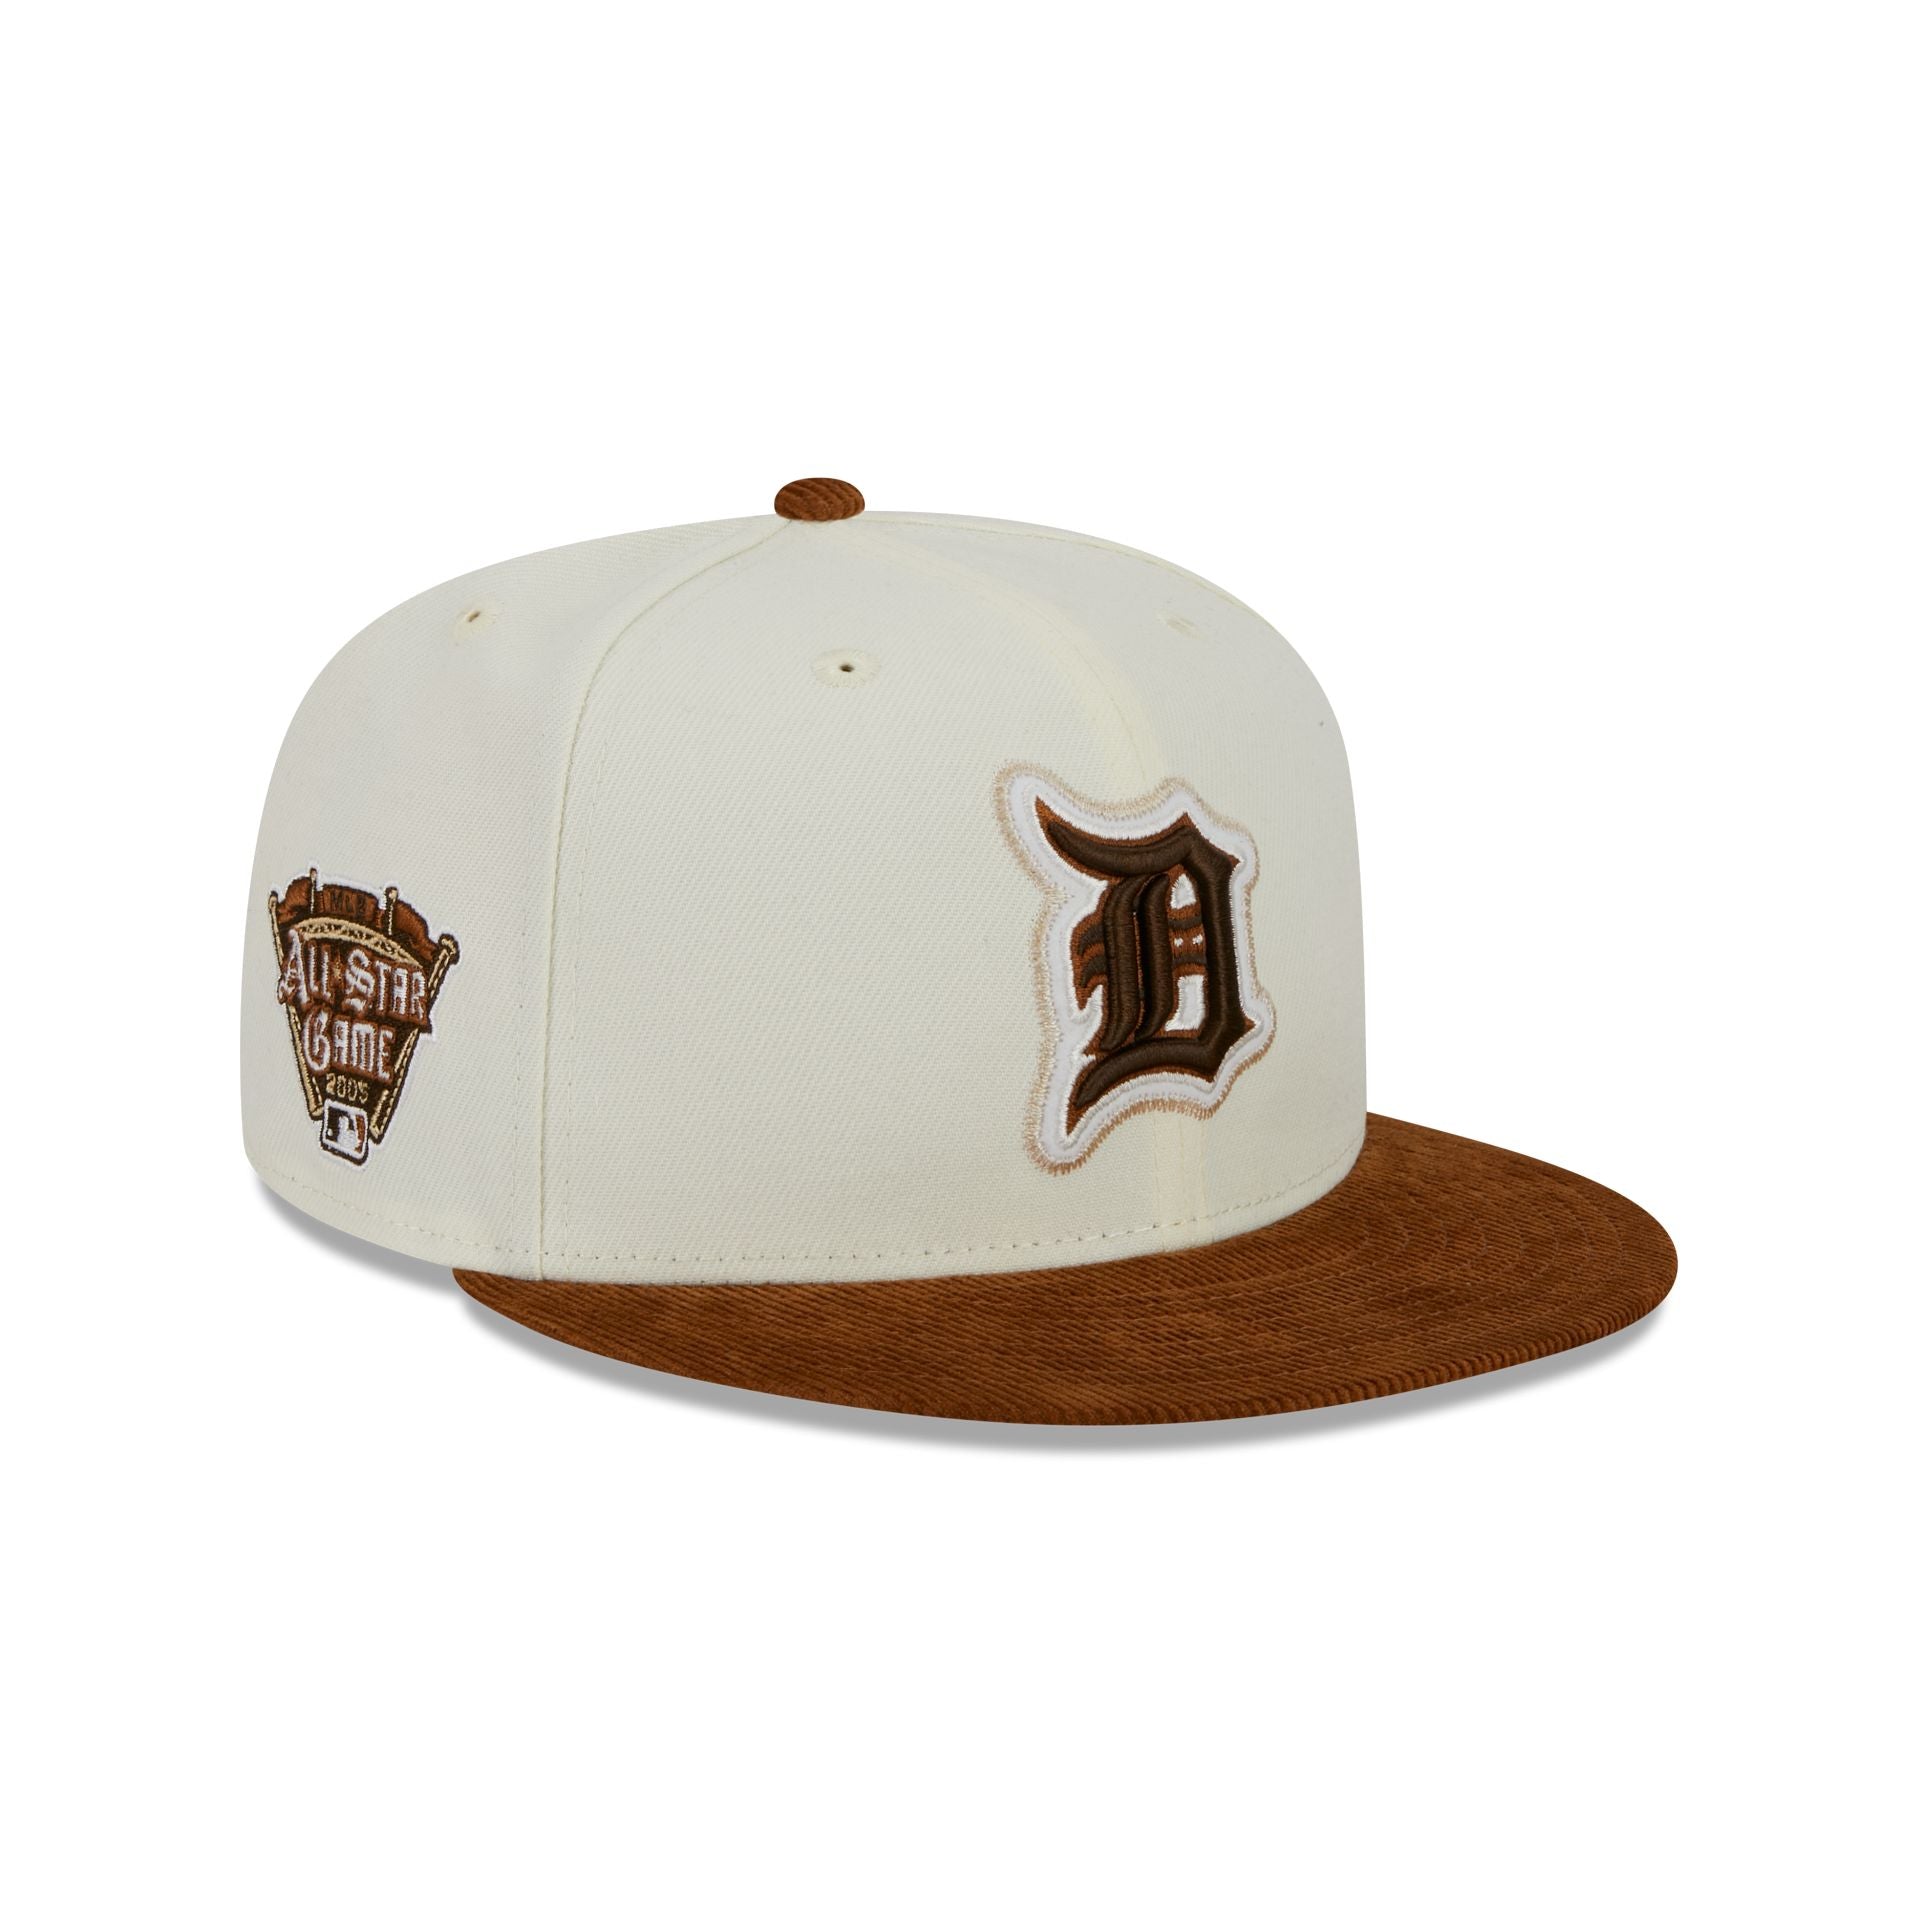 St. Louis Cardinals Tiramisu 59FIFTY Fitted Hat, Brown - Size: 7 7/8, MLB by New Era